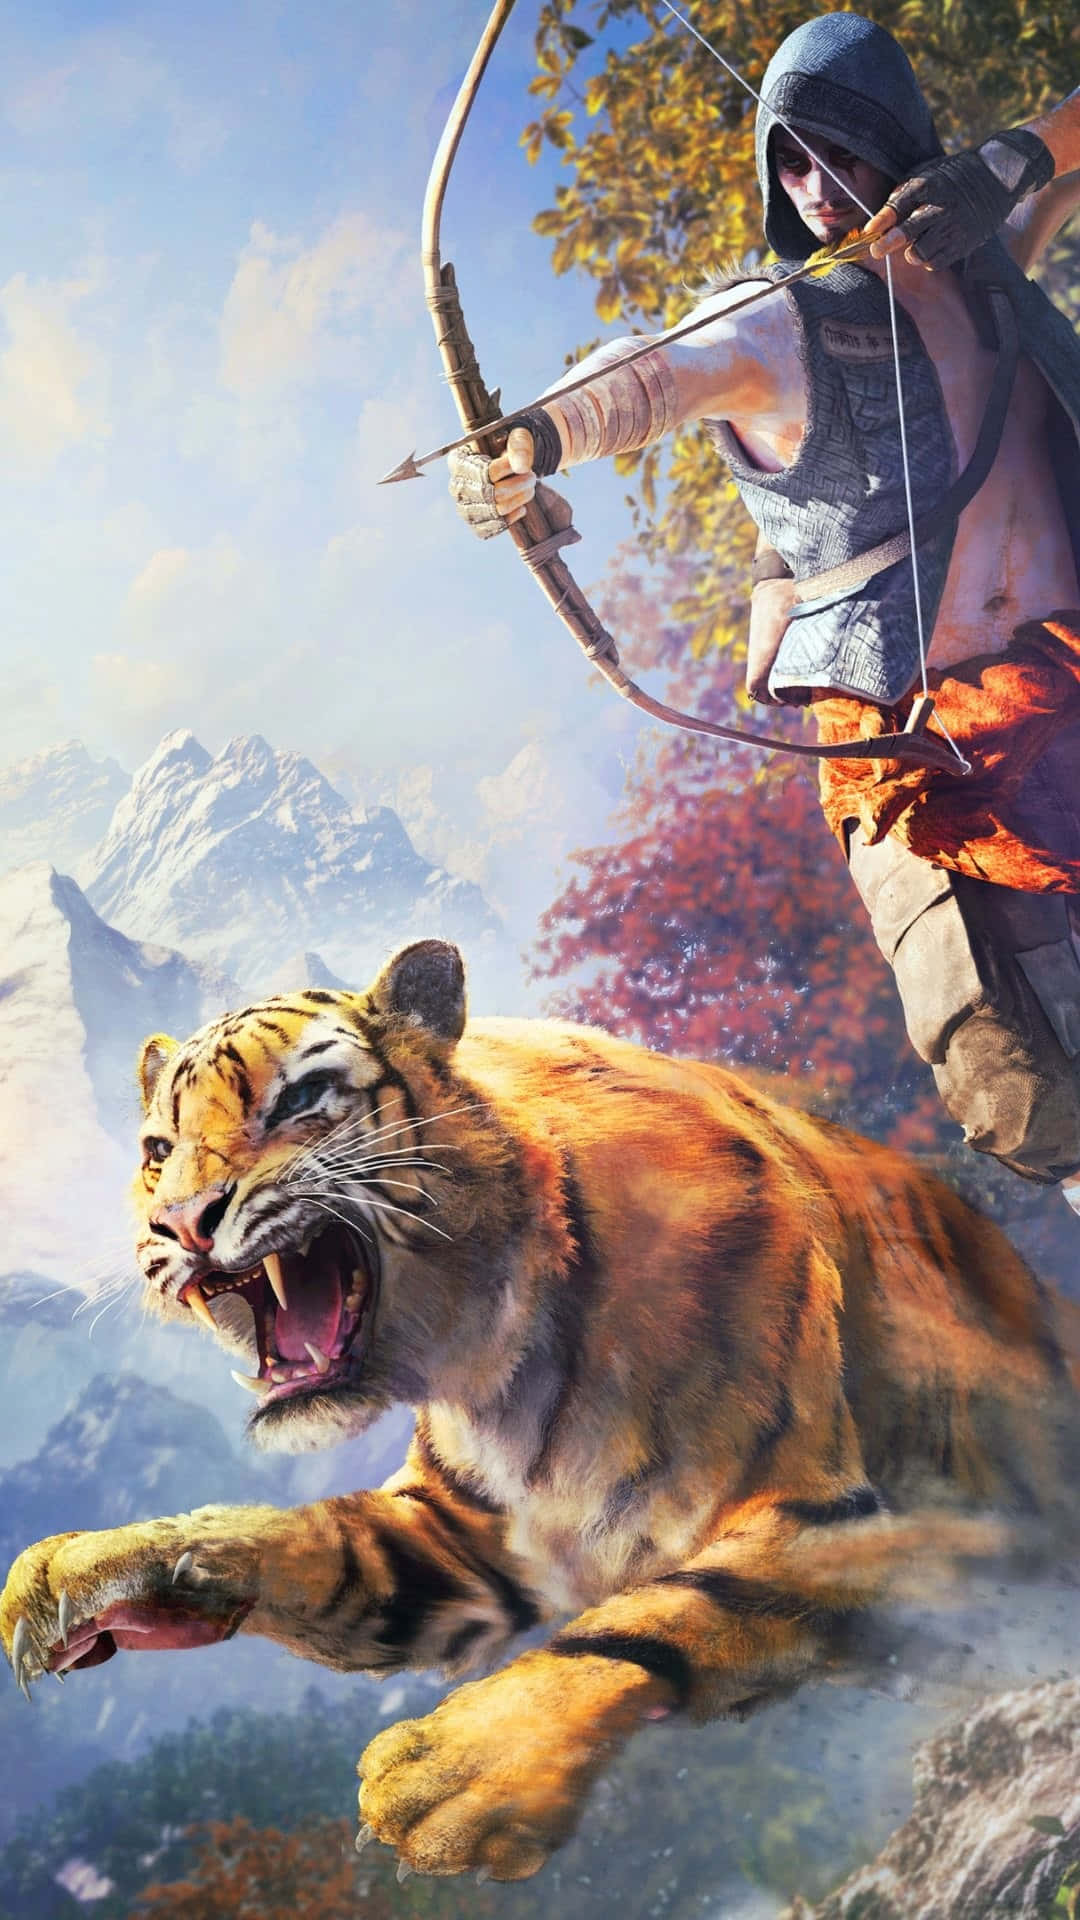 A Man Is Flying Over A Tiger And A Tiger Wallpaper